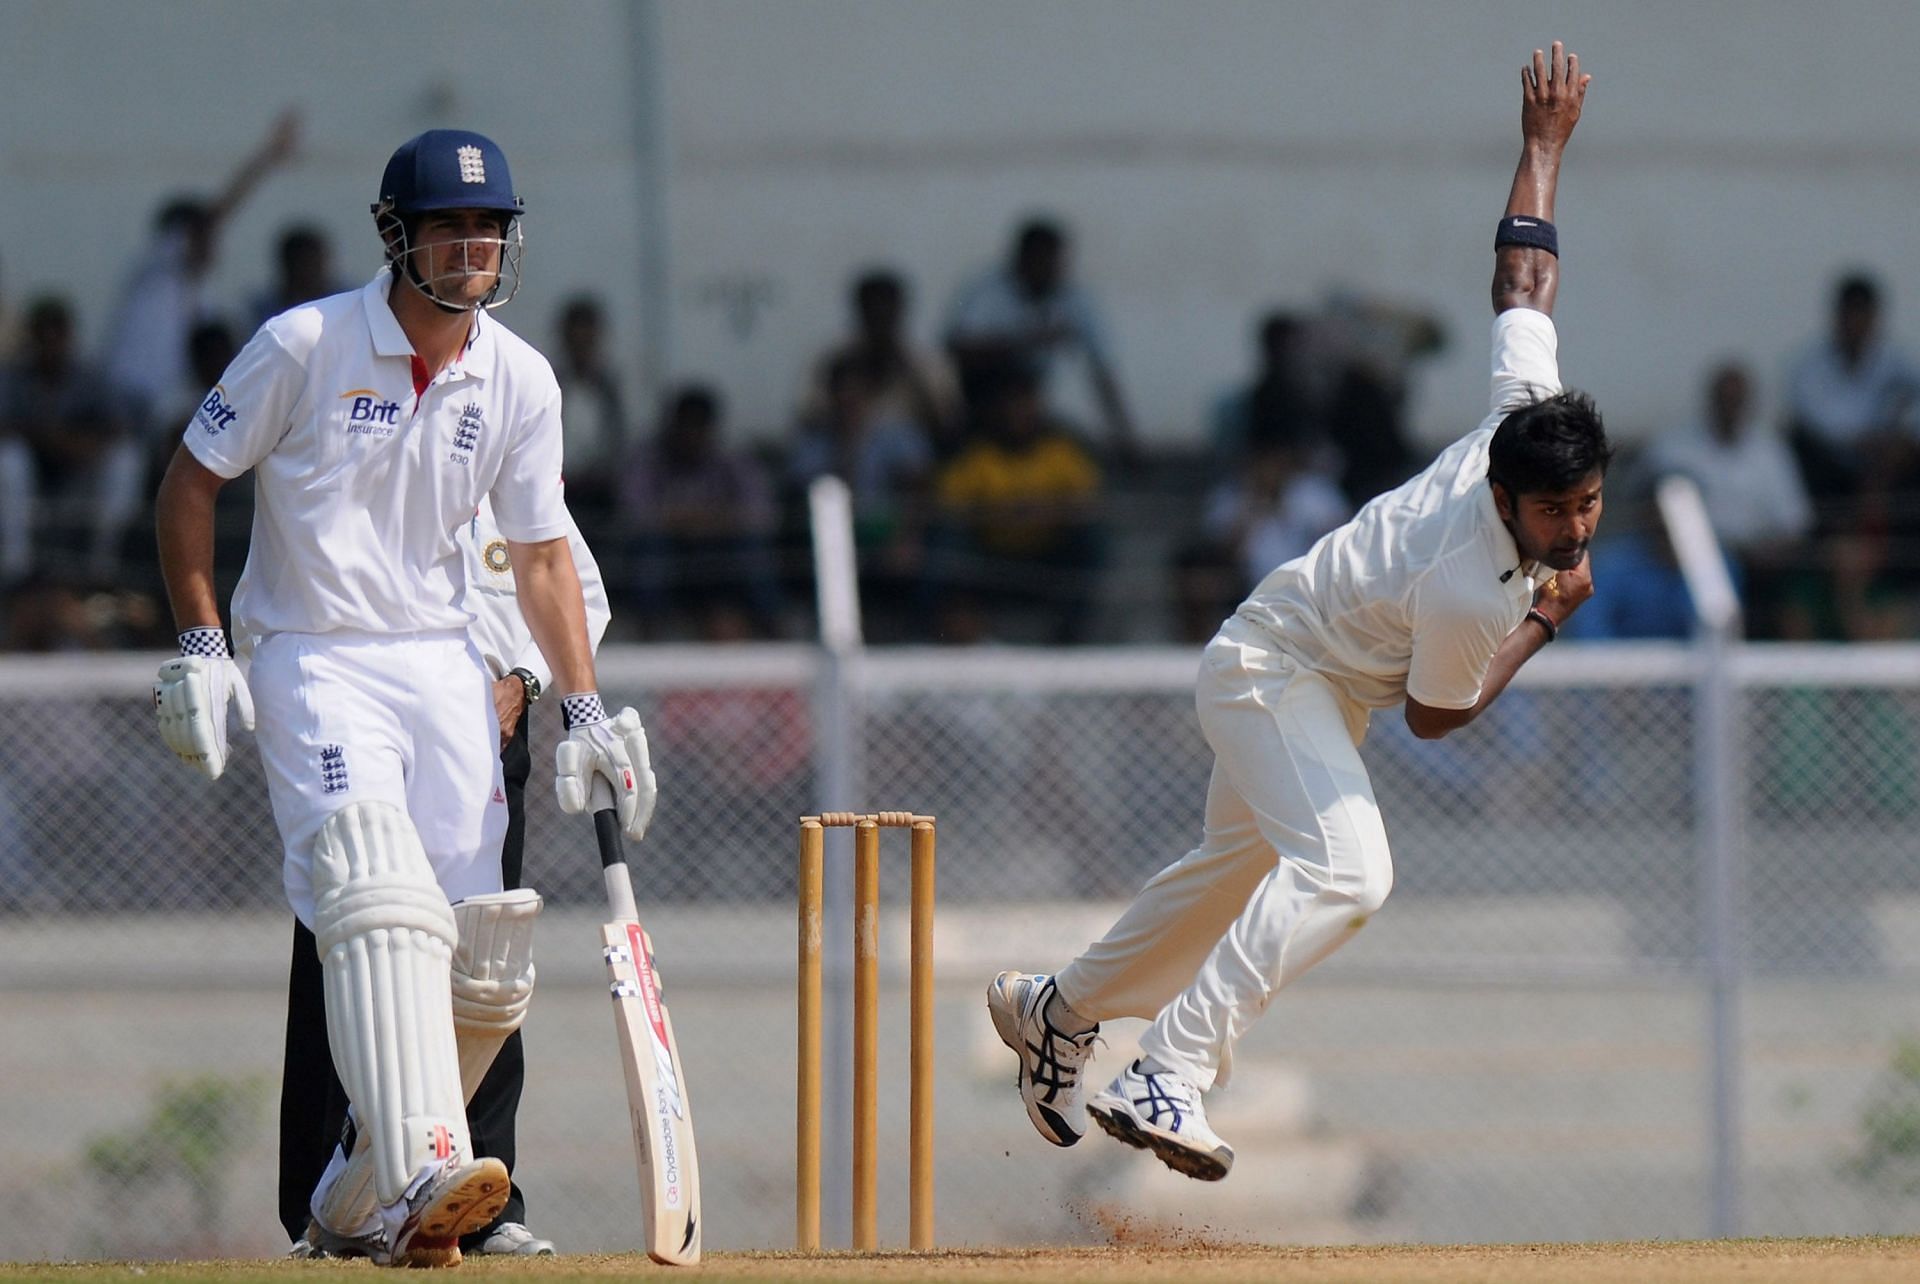 Vinay Kumar played only a solitary Test match for the Indian cricket team (Image courtesy: Getty Images)